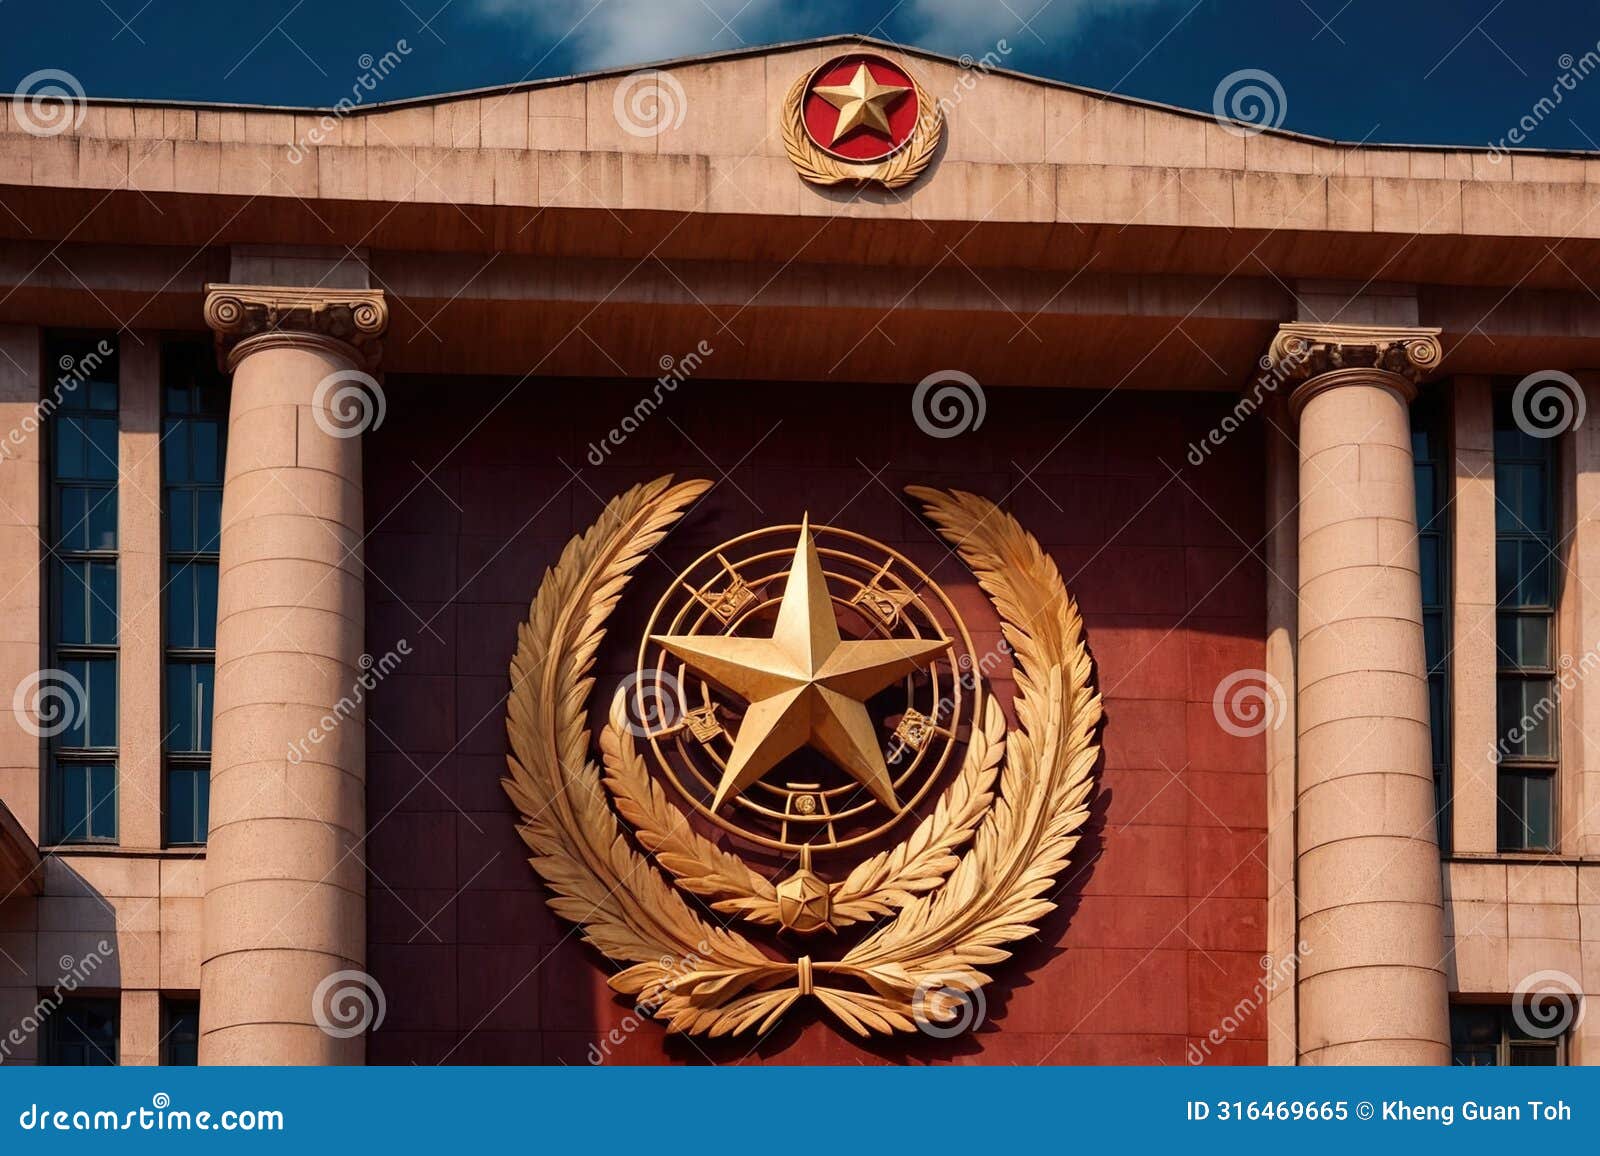 soviet style authoritarian totalitarian building, with communist s